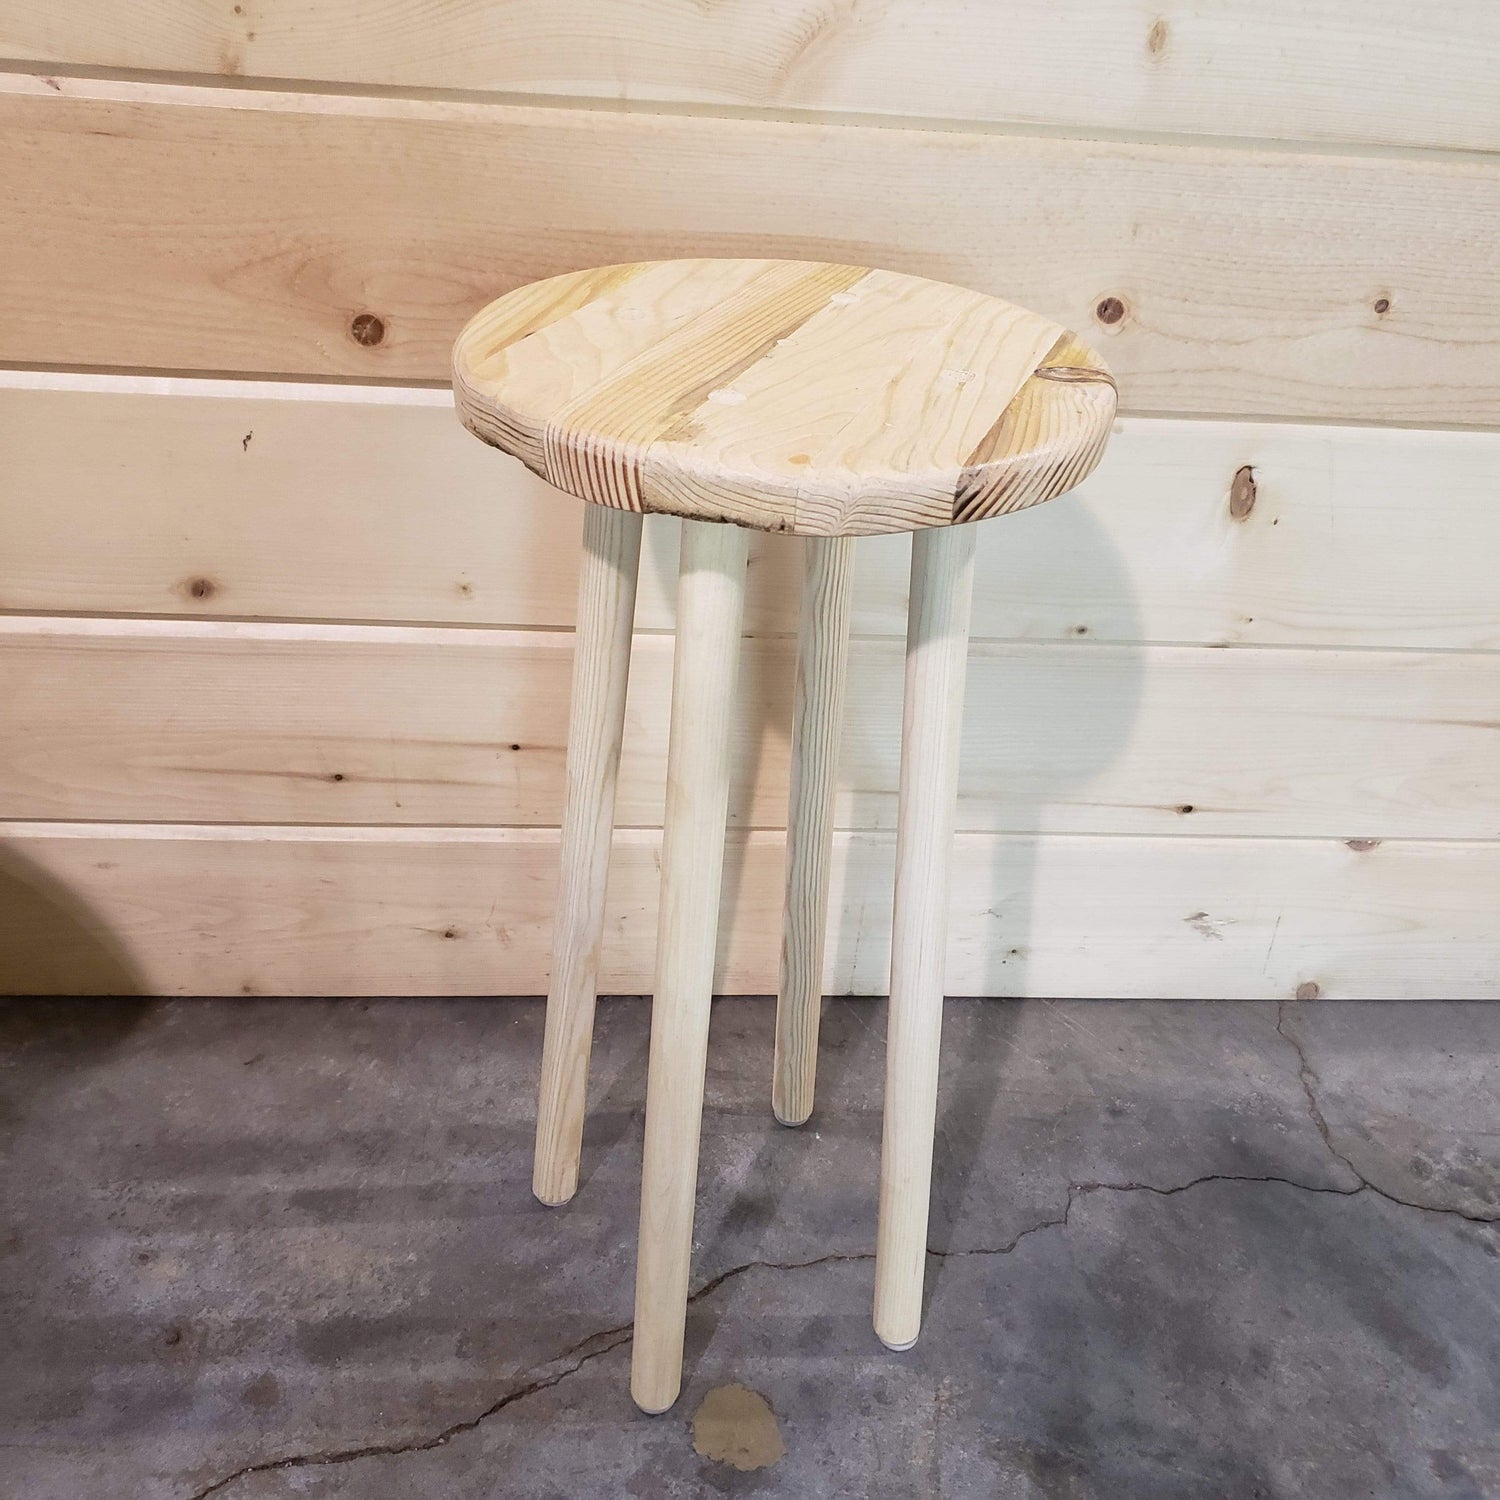 Joe Stearns Stand 18" / Pine Toadstool Plant Stand